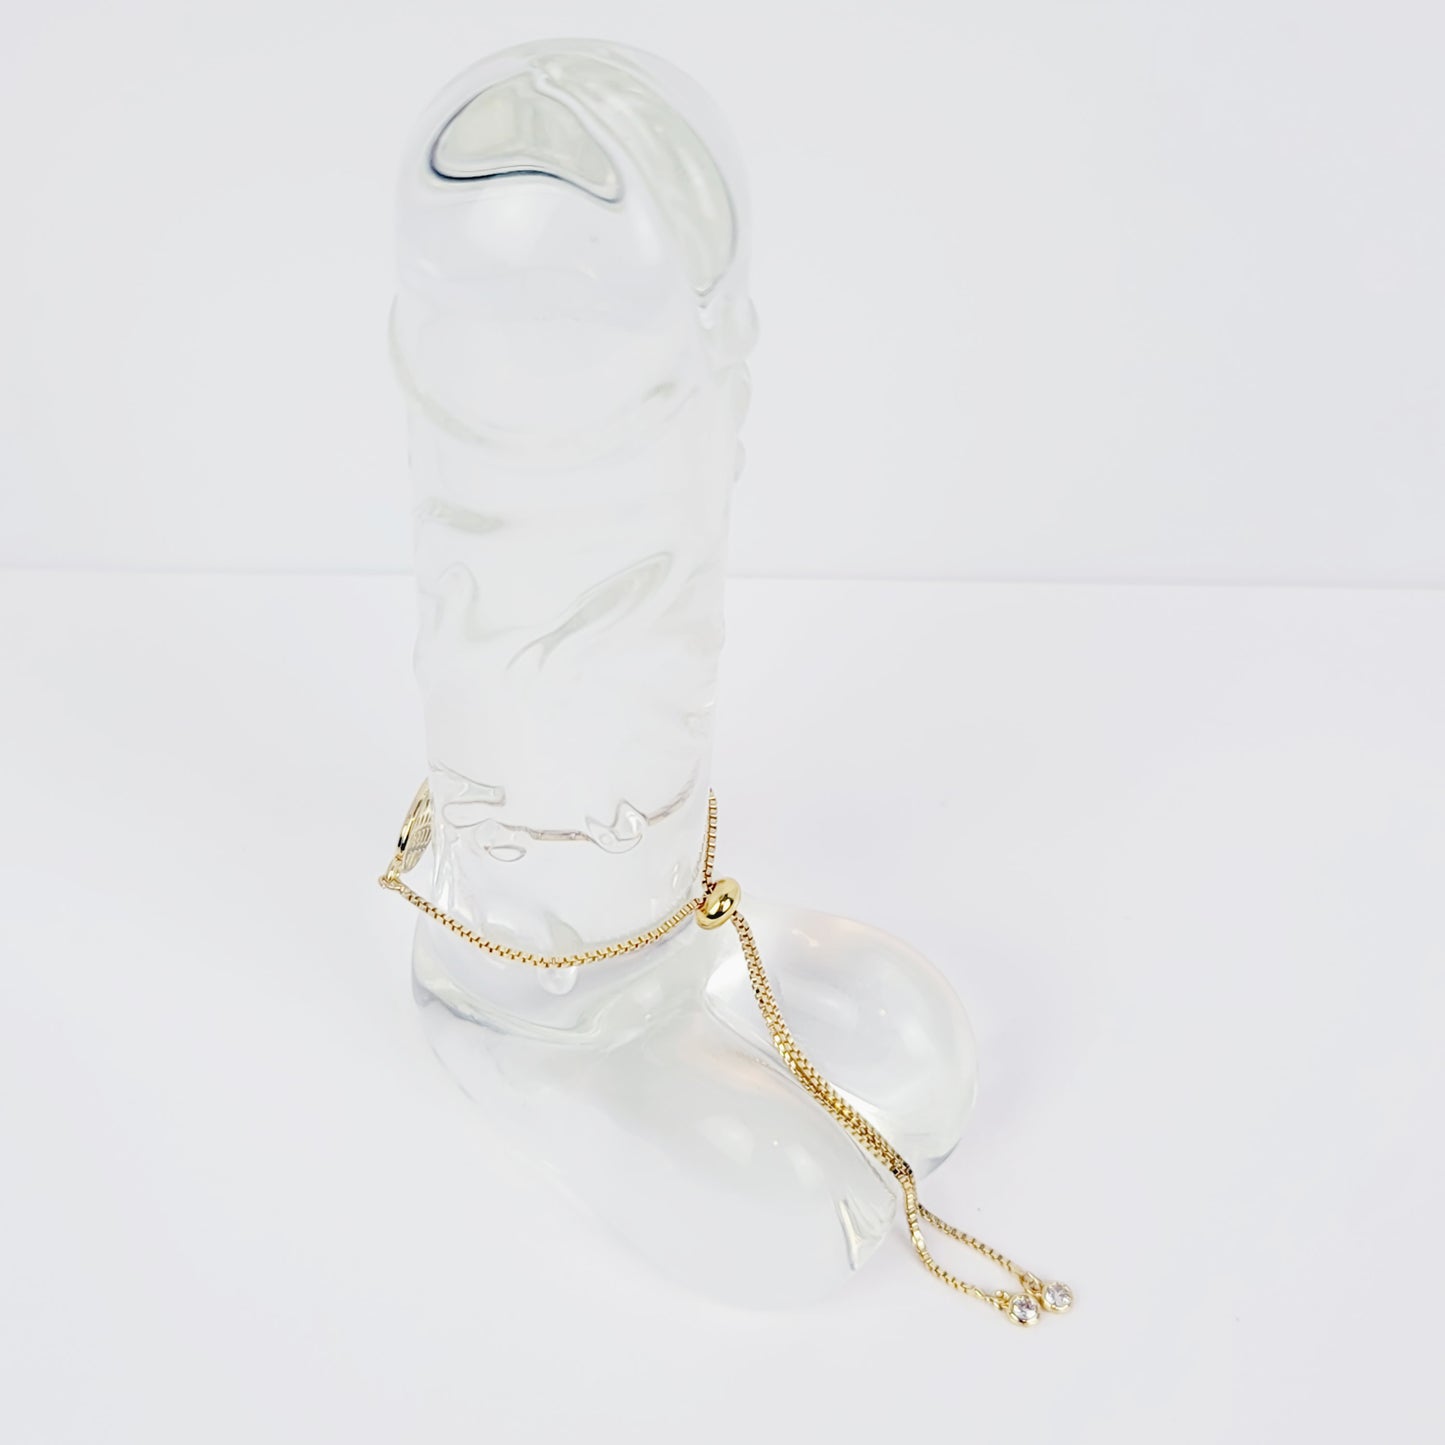 Pineapple Penis Noose, Gold, with Rhinestones. MATURE Body Jewelry for Men, Penis Bracelet